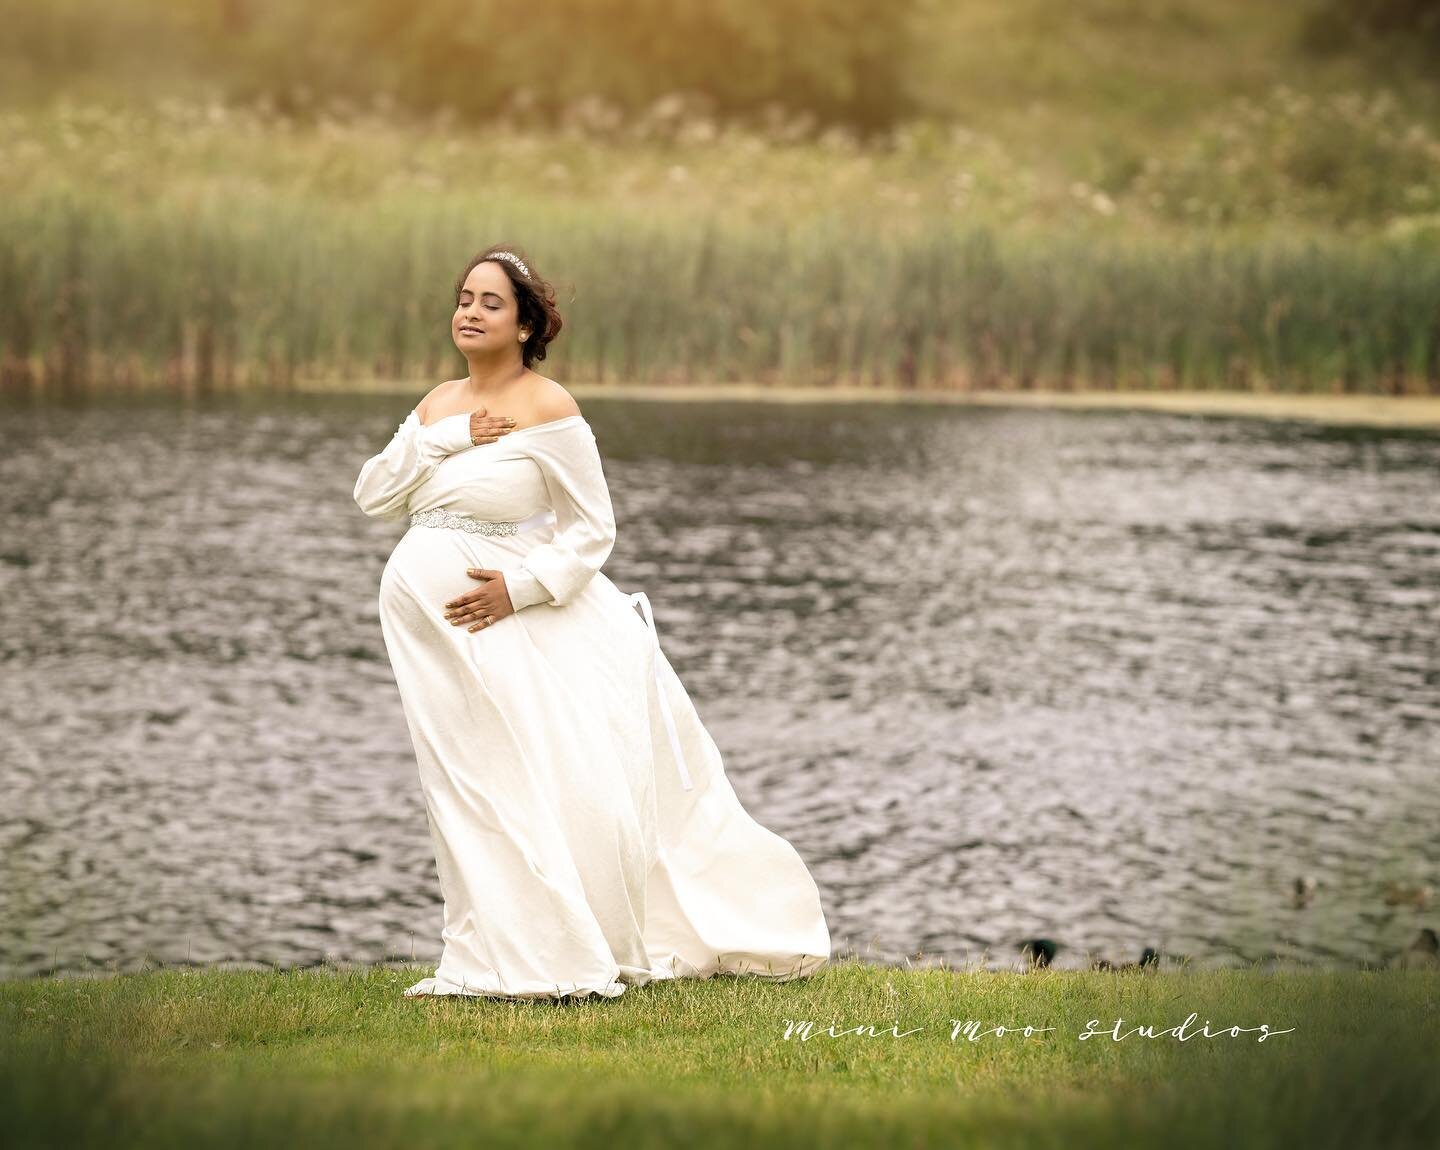 It&rsquo;s been all go since I opened back up in May! 

Here is a sneak peek from Sunday&rsquo;s maternity session. We didn&rsquo;t know how the weather would play  out, but it stayed dry and I have got some seriously beautiful images as a result! 

